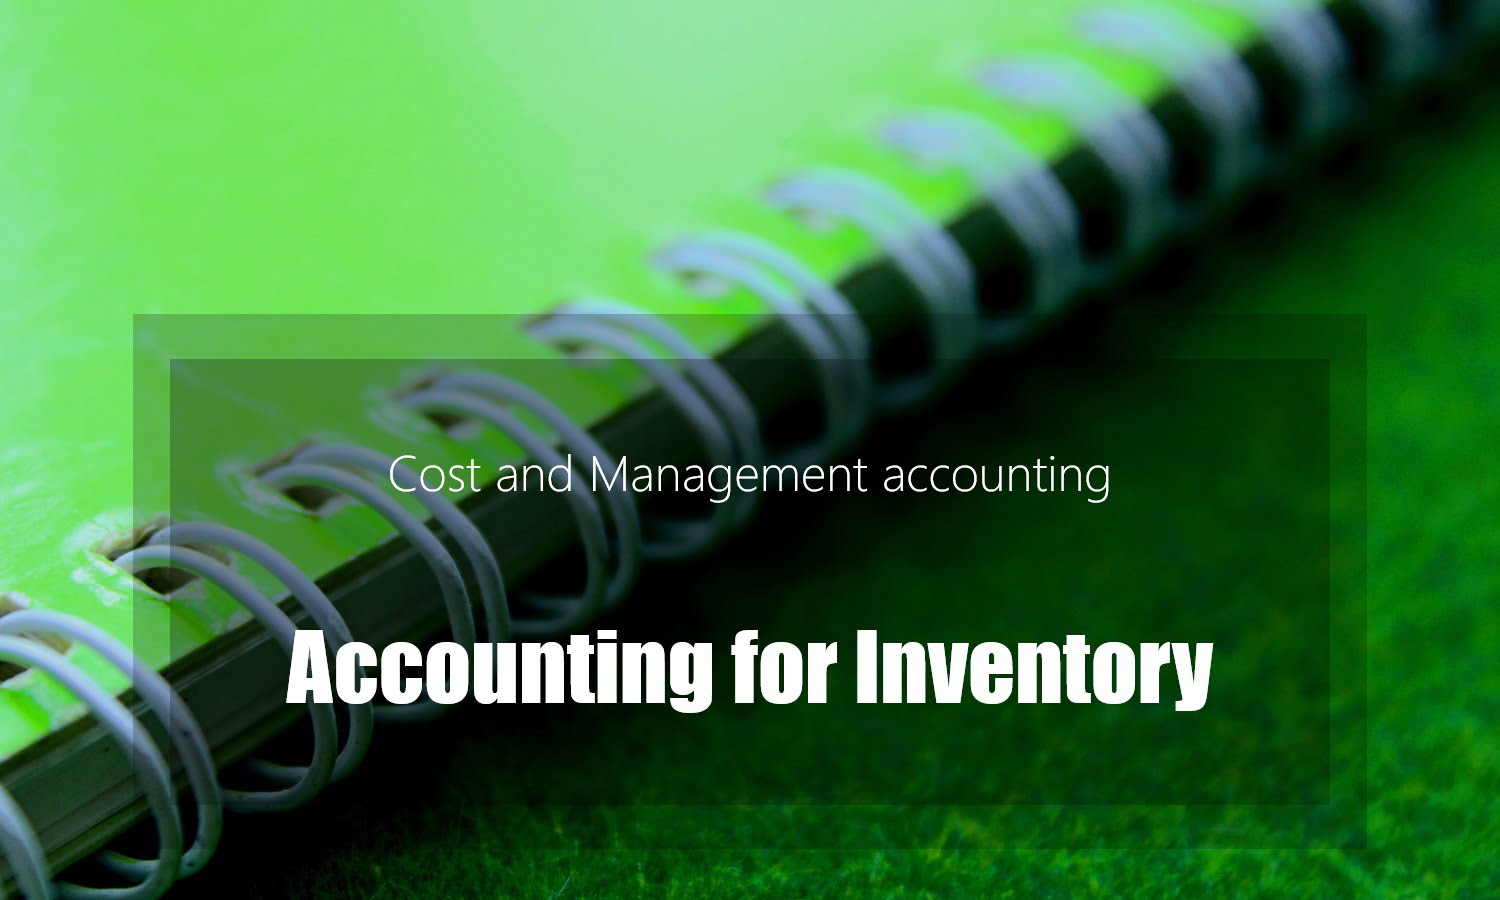 Accounting for Inventory, Introduction to cost and management accounting, Cost Estimation, High/Low, Linear Regression Analysis